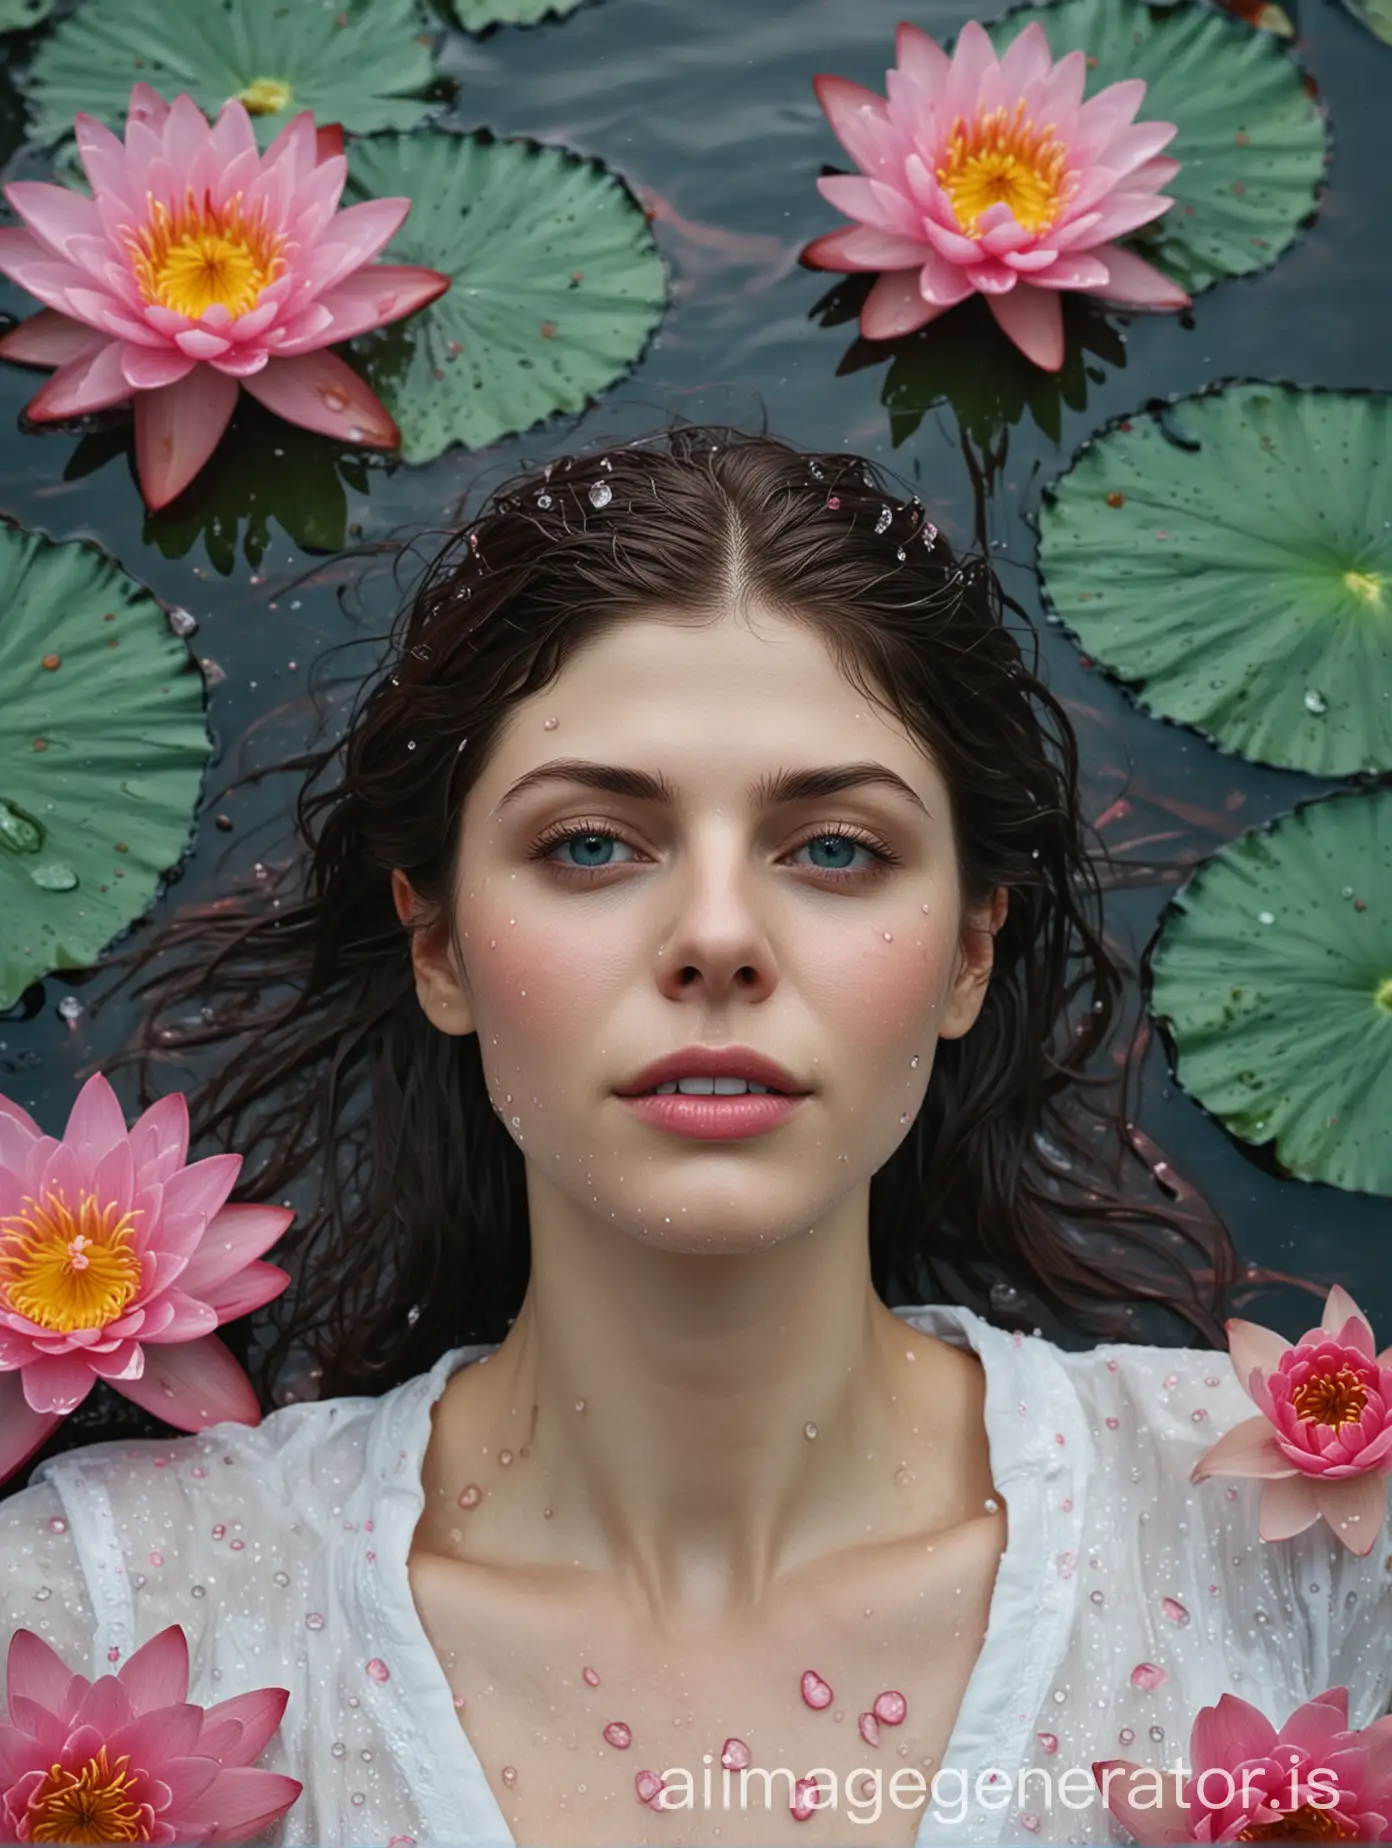 halfbody view, alexandra daddario face, woman's face wet, woman hair in turquoise color, woman lying in water pond, surrounded by a big pink water lily flowers, woman wearing white nightgown, water lilies are heavily covered in dewdrops